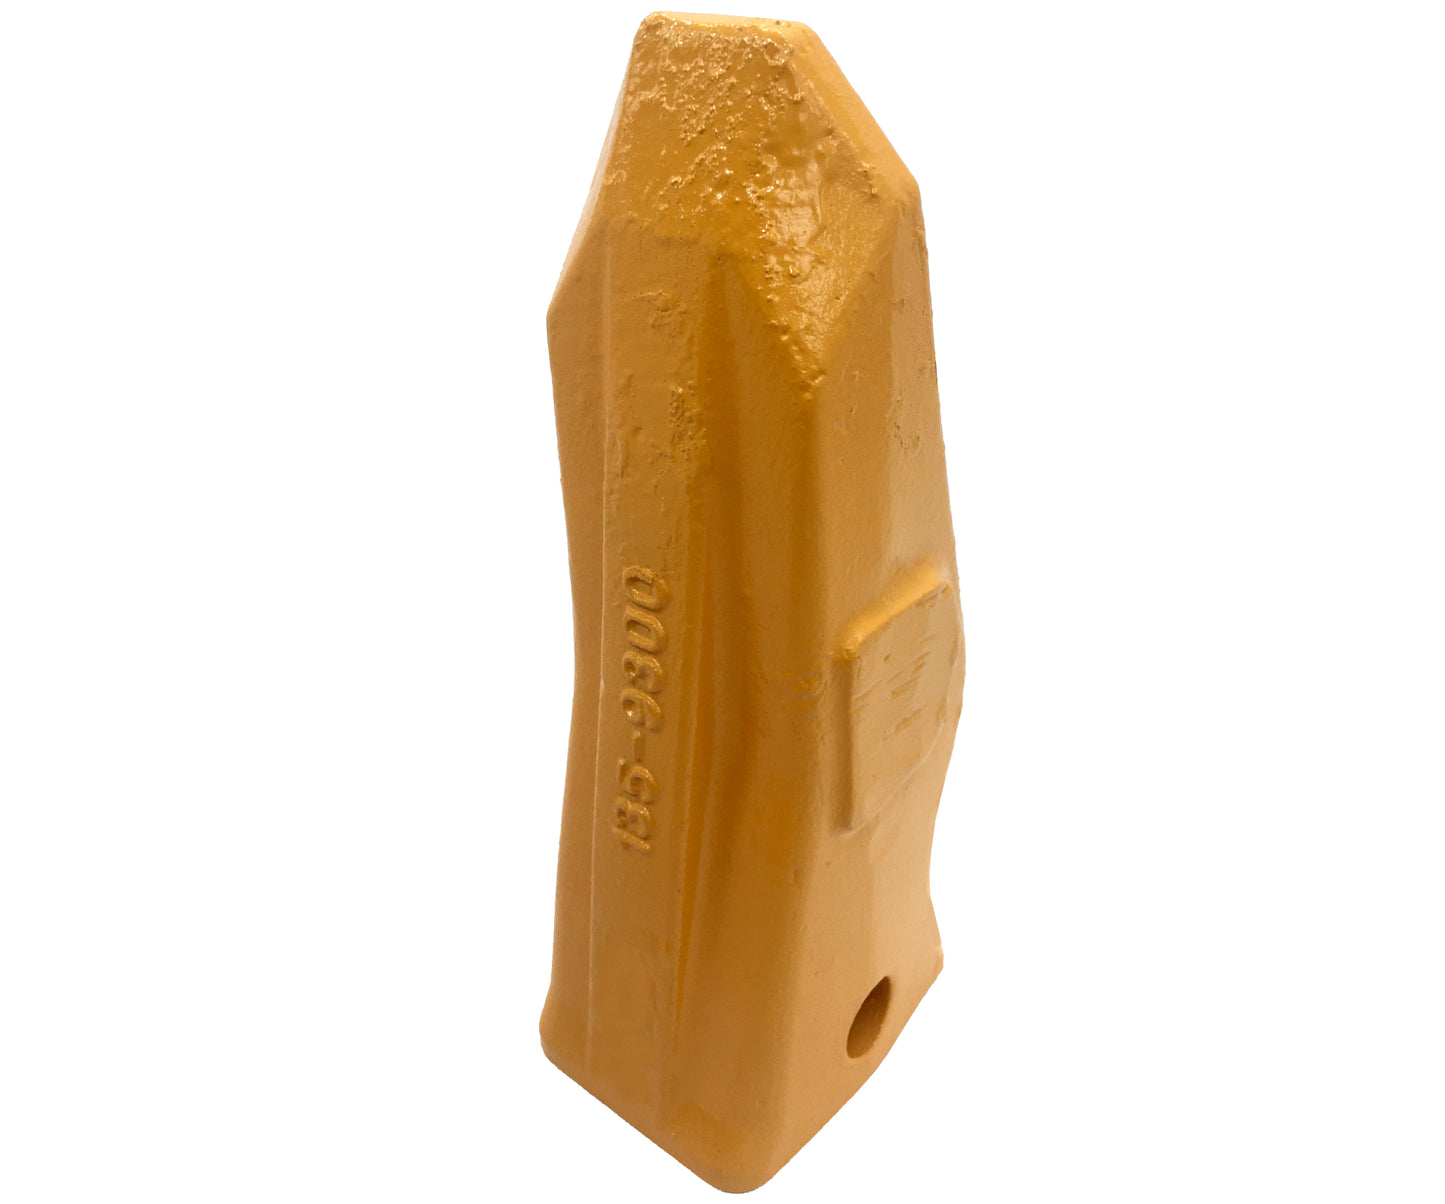 135-9300 HD Abrasion Penetration Tooth - 'Cat Style' J300 Series